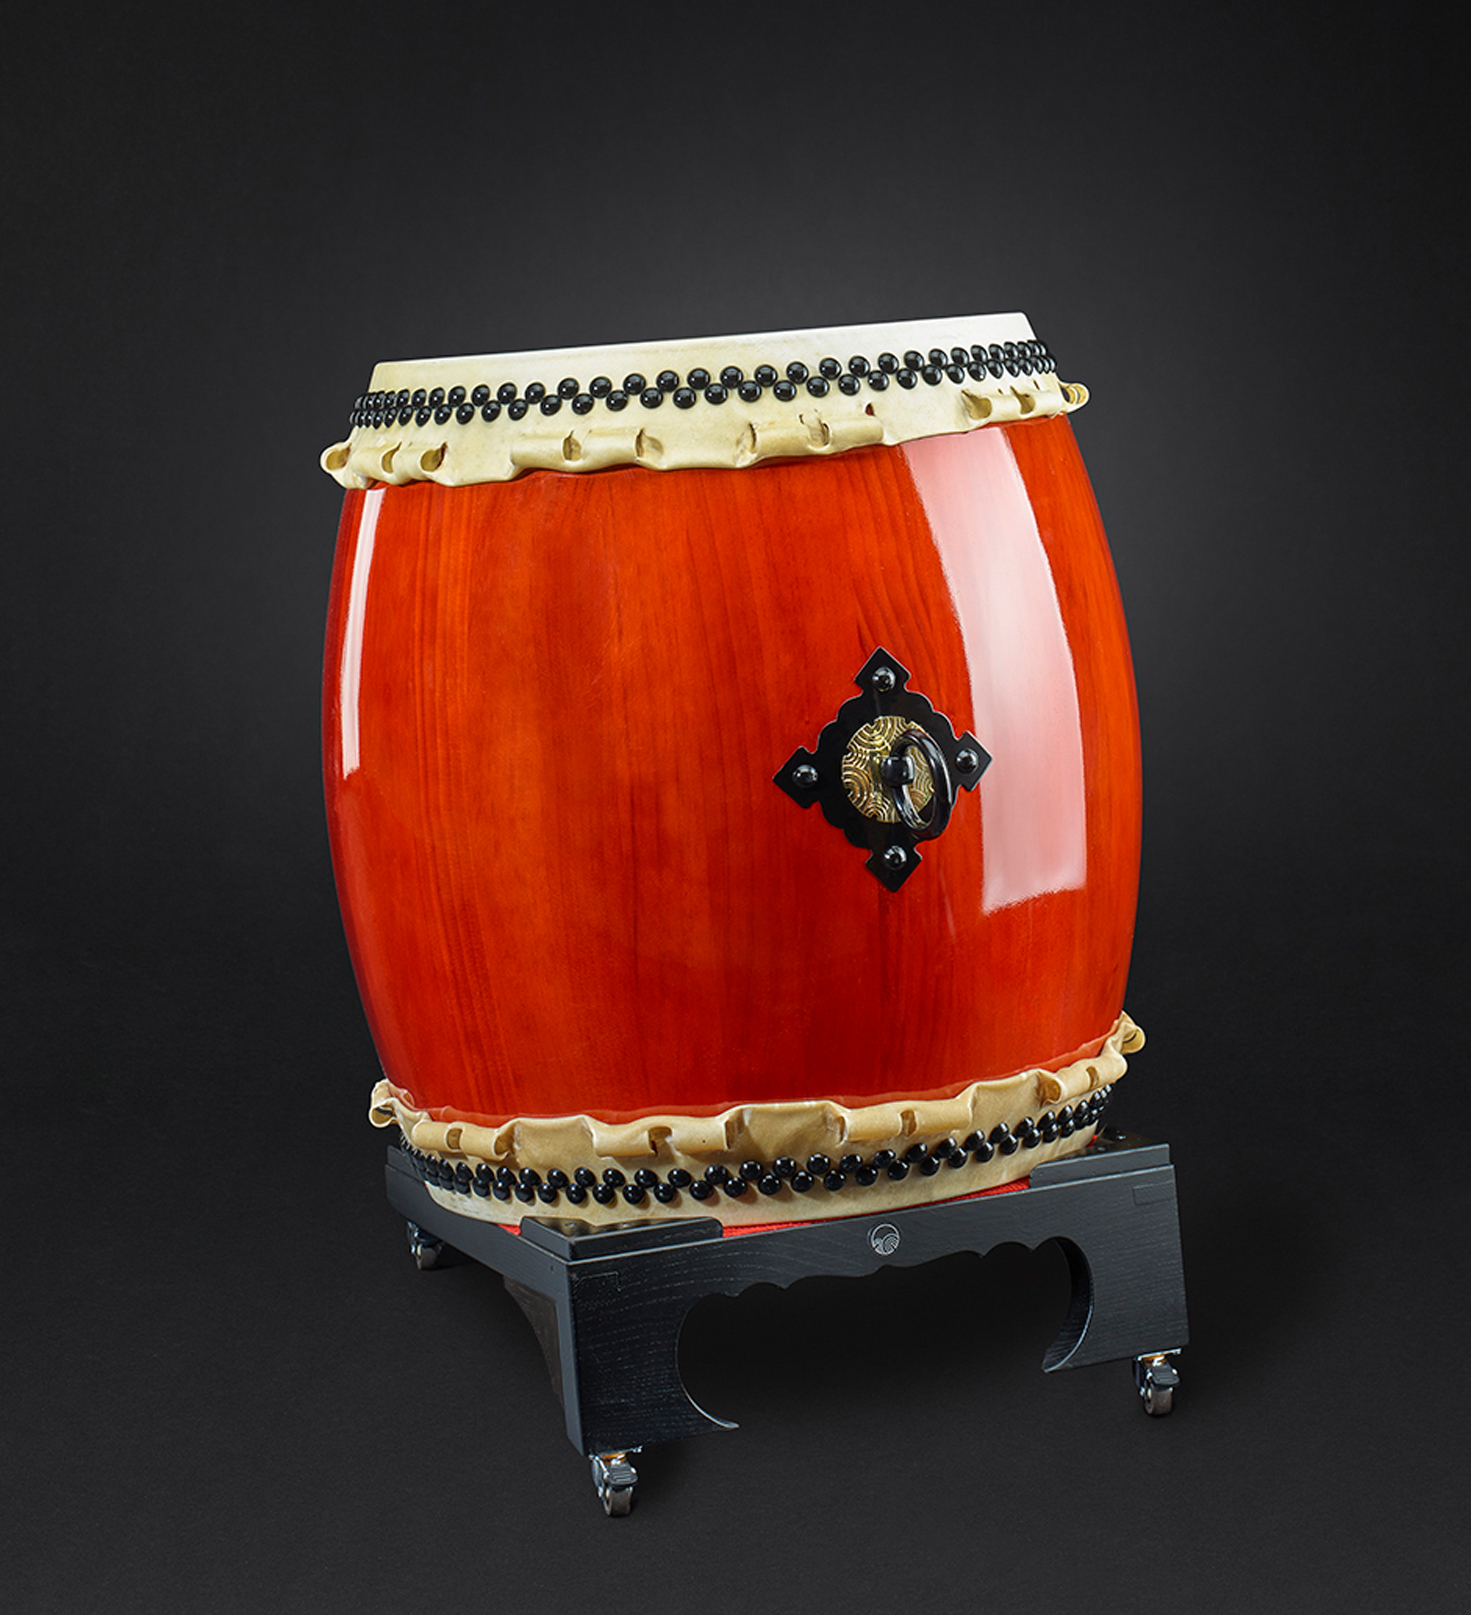 Miya-Daiko hq drum 48cm (995) with traditional-stand (160)